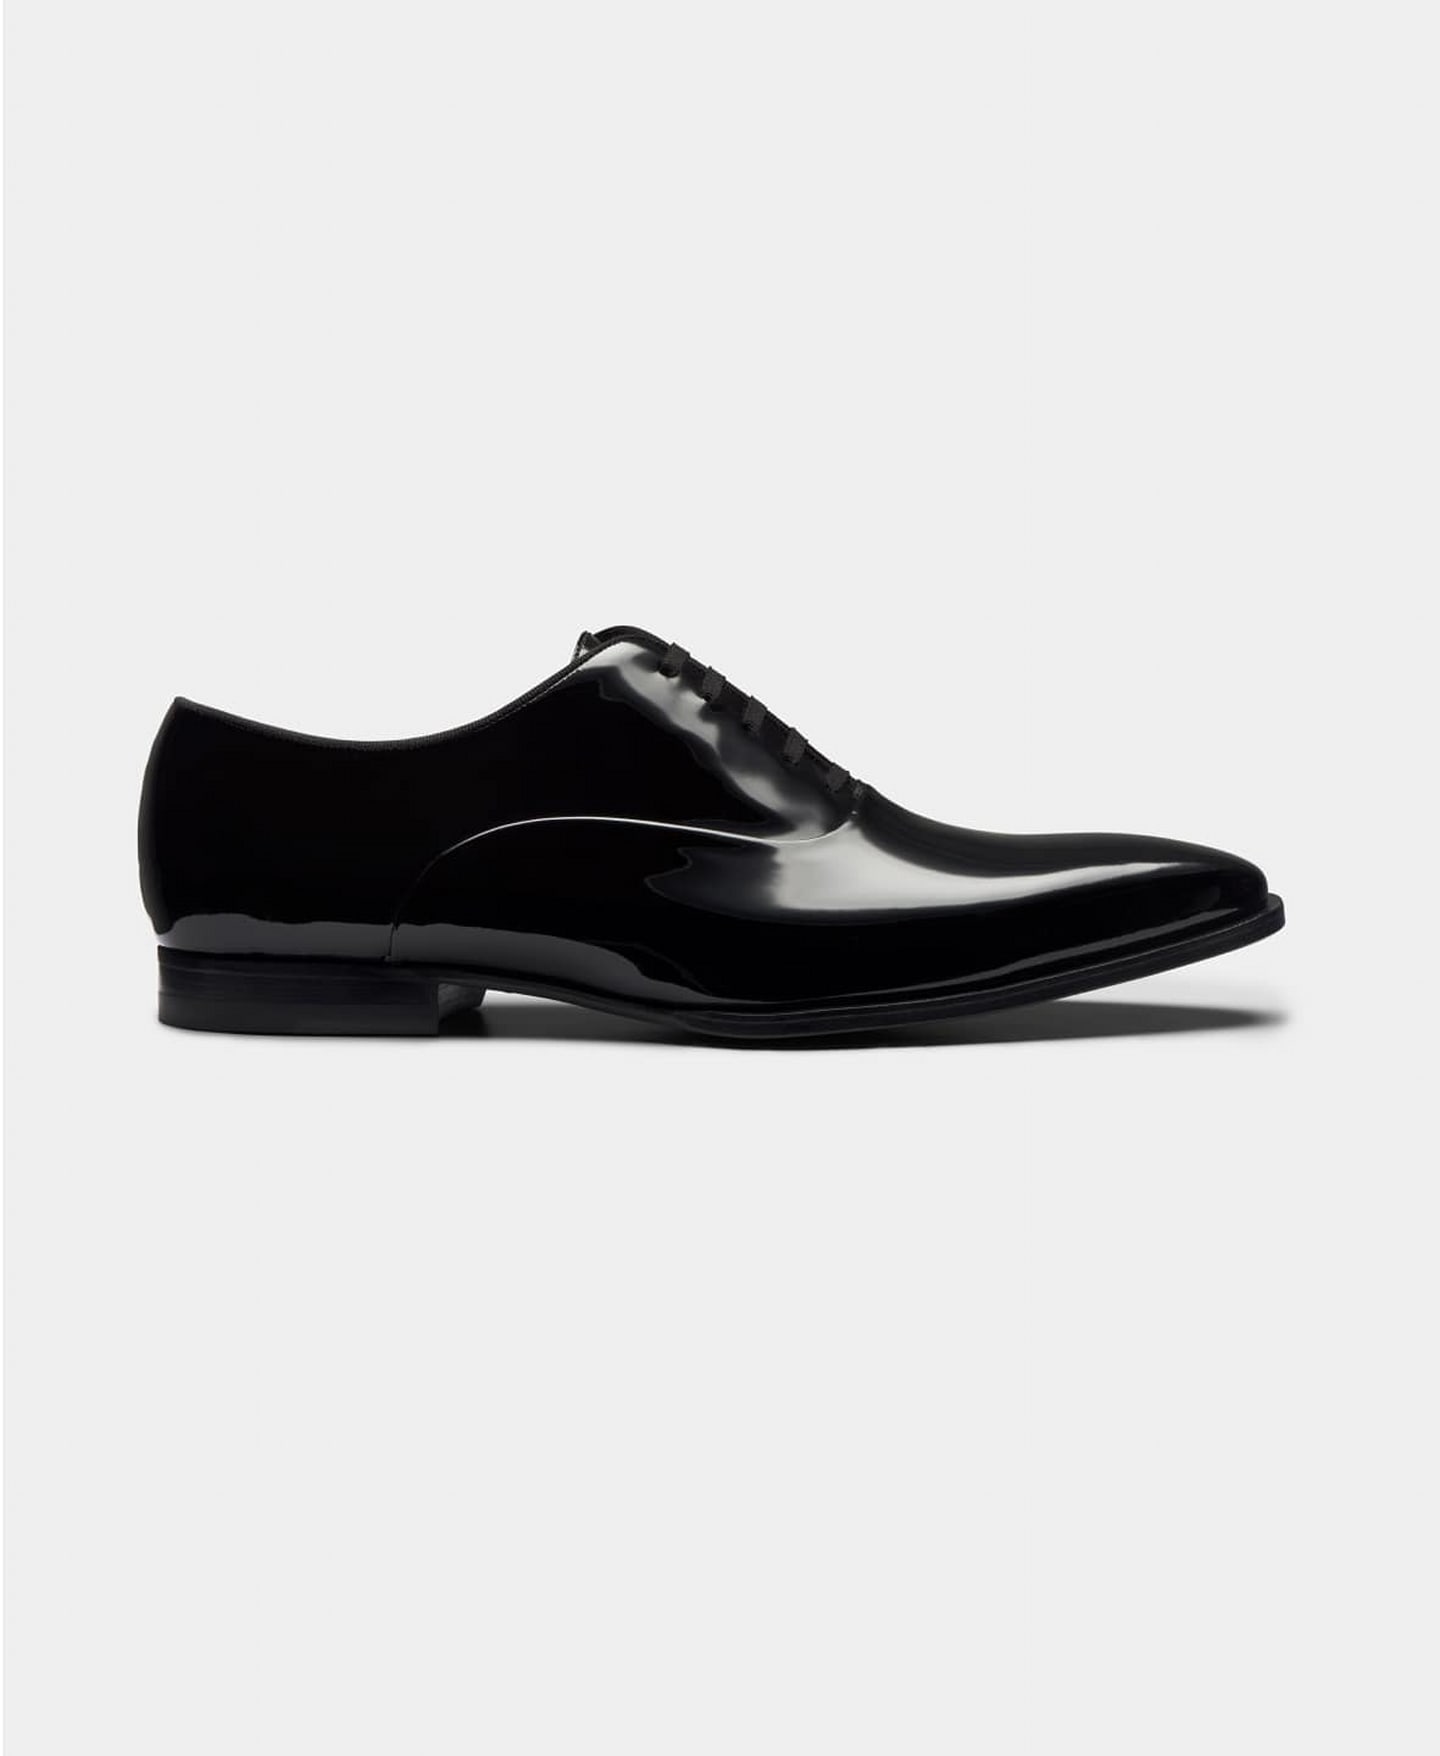 Black patent leather lace-up shoes